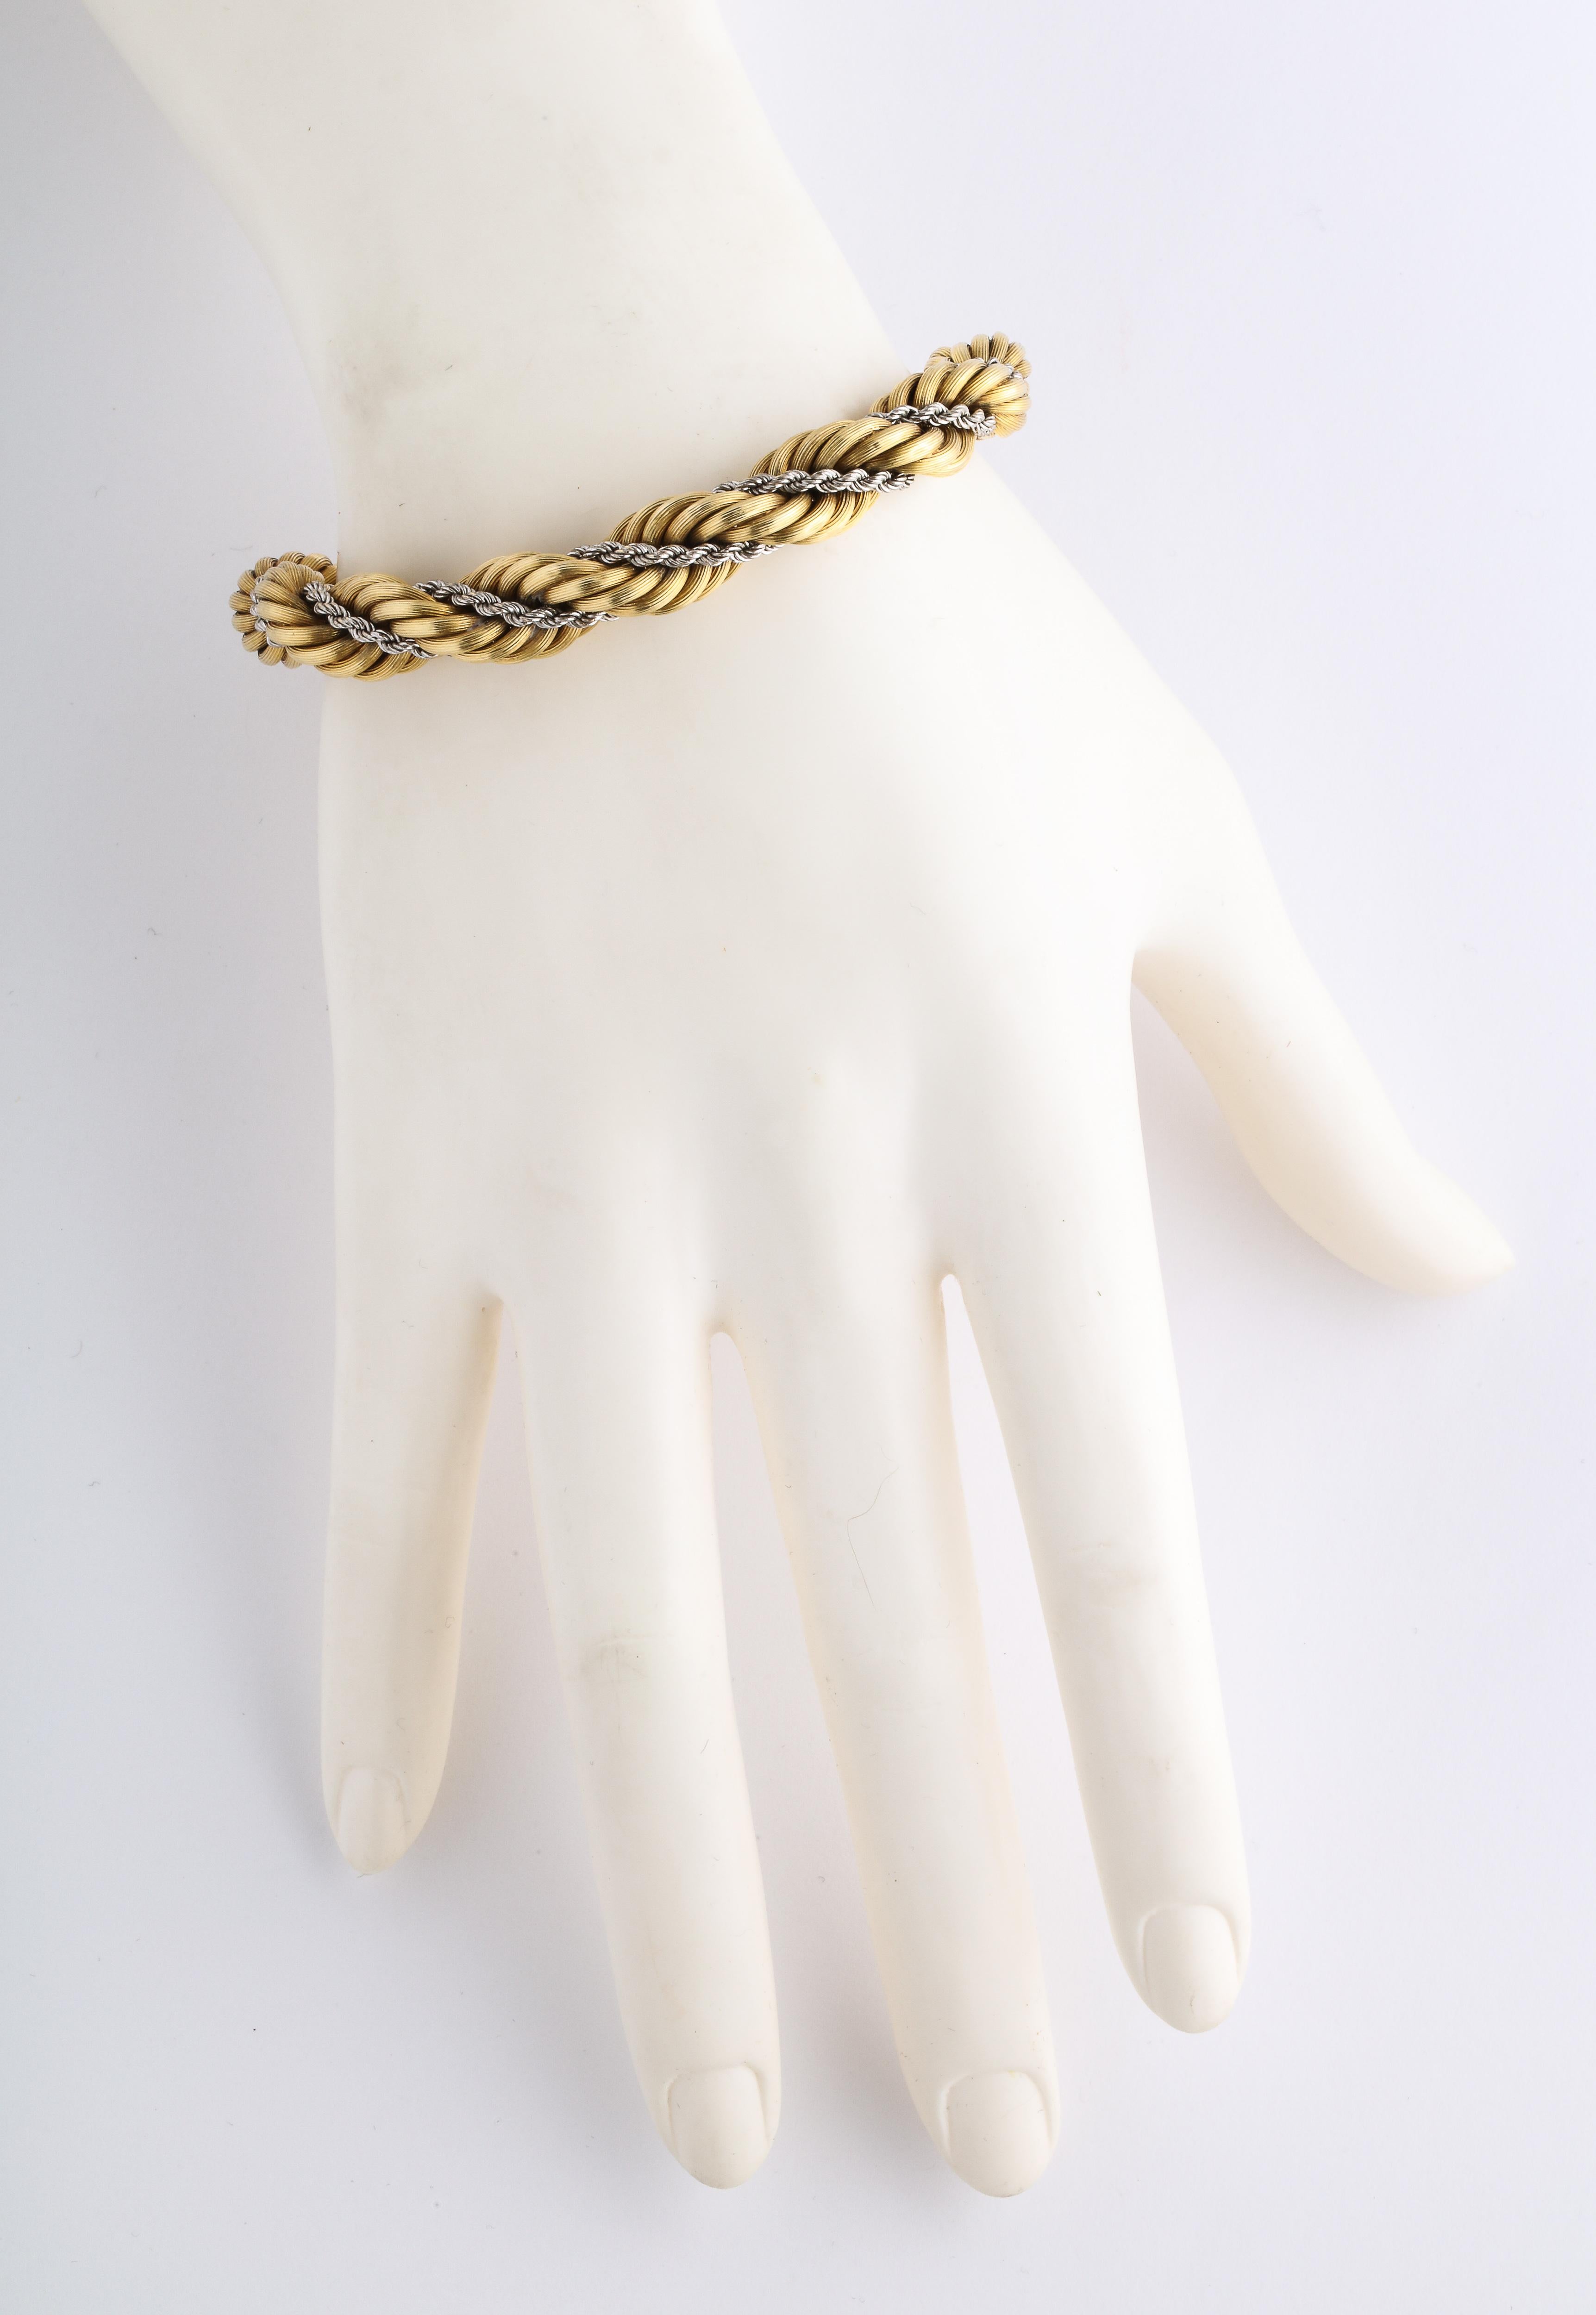  1960s Cartier Two-Tone Gold Rope Twist Chain Bracelet with Box 1